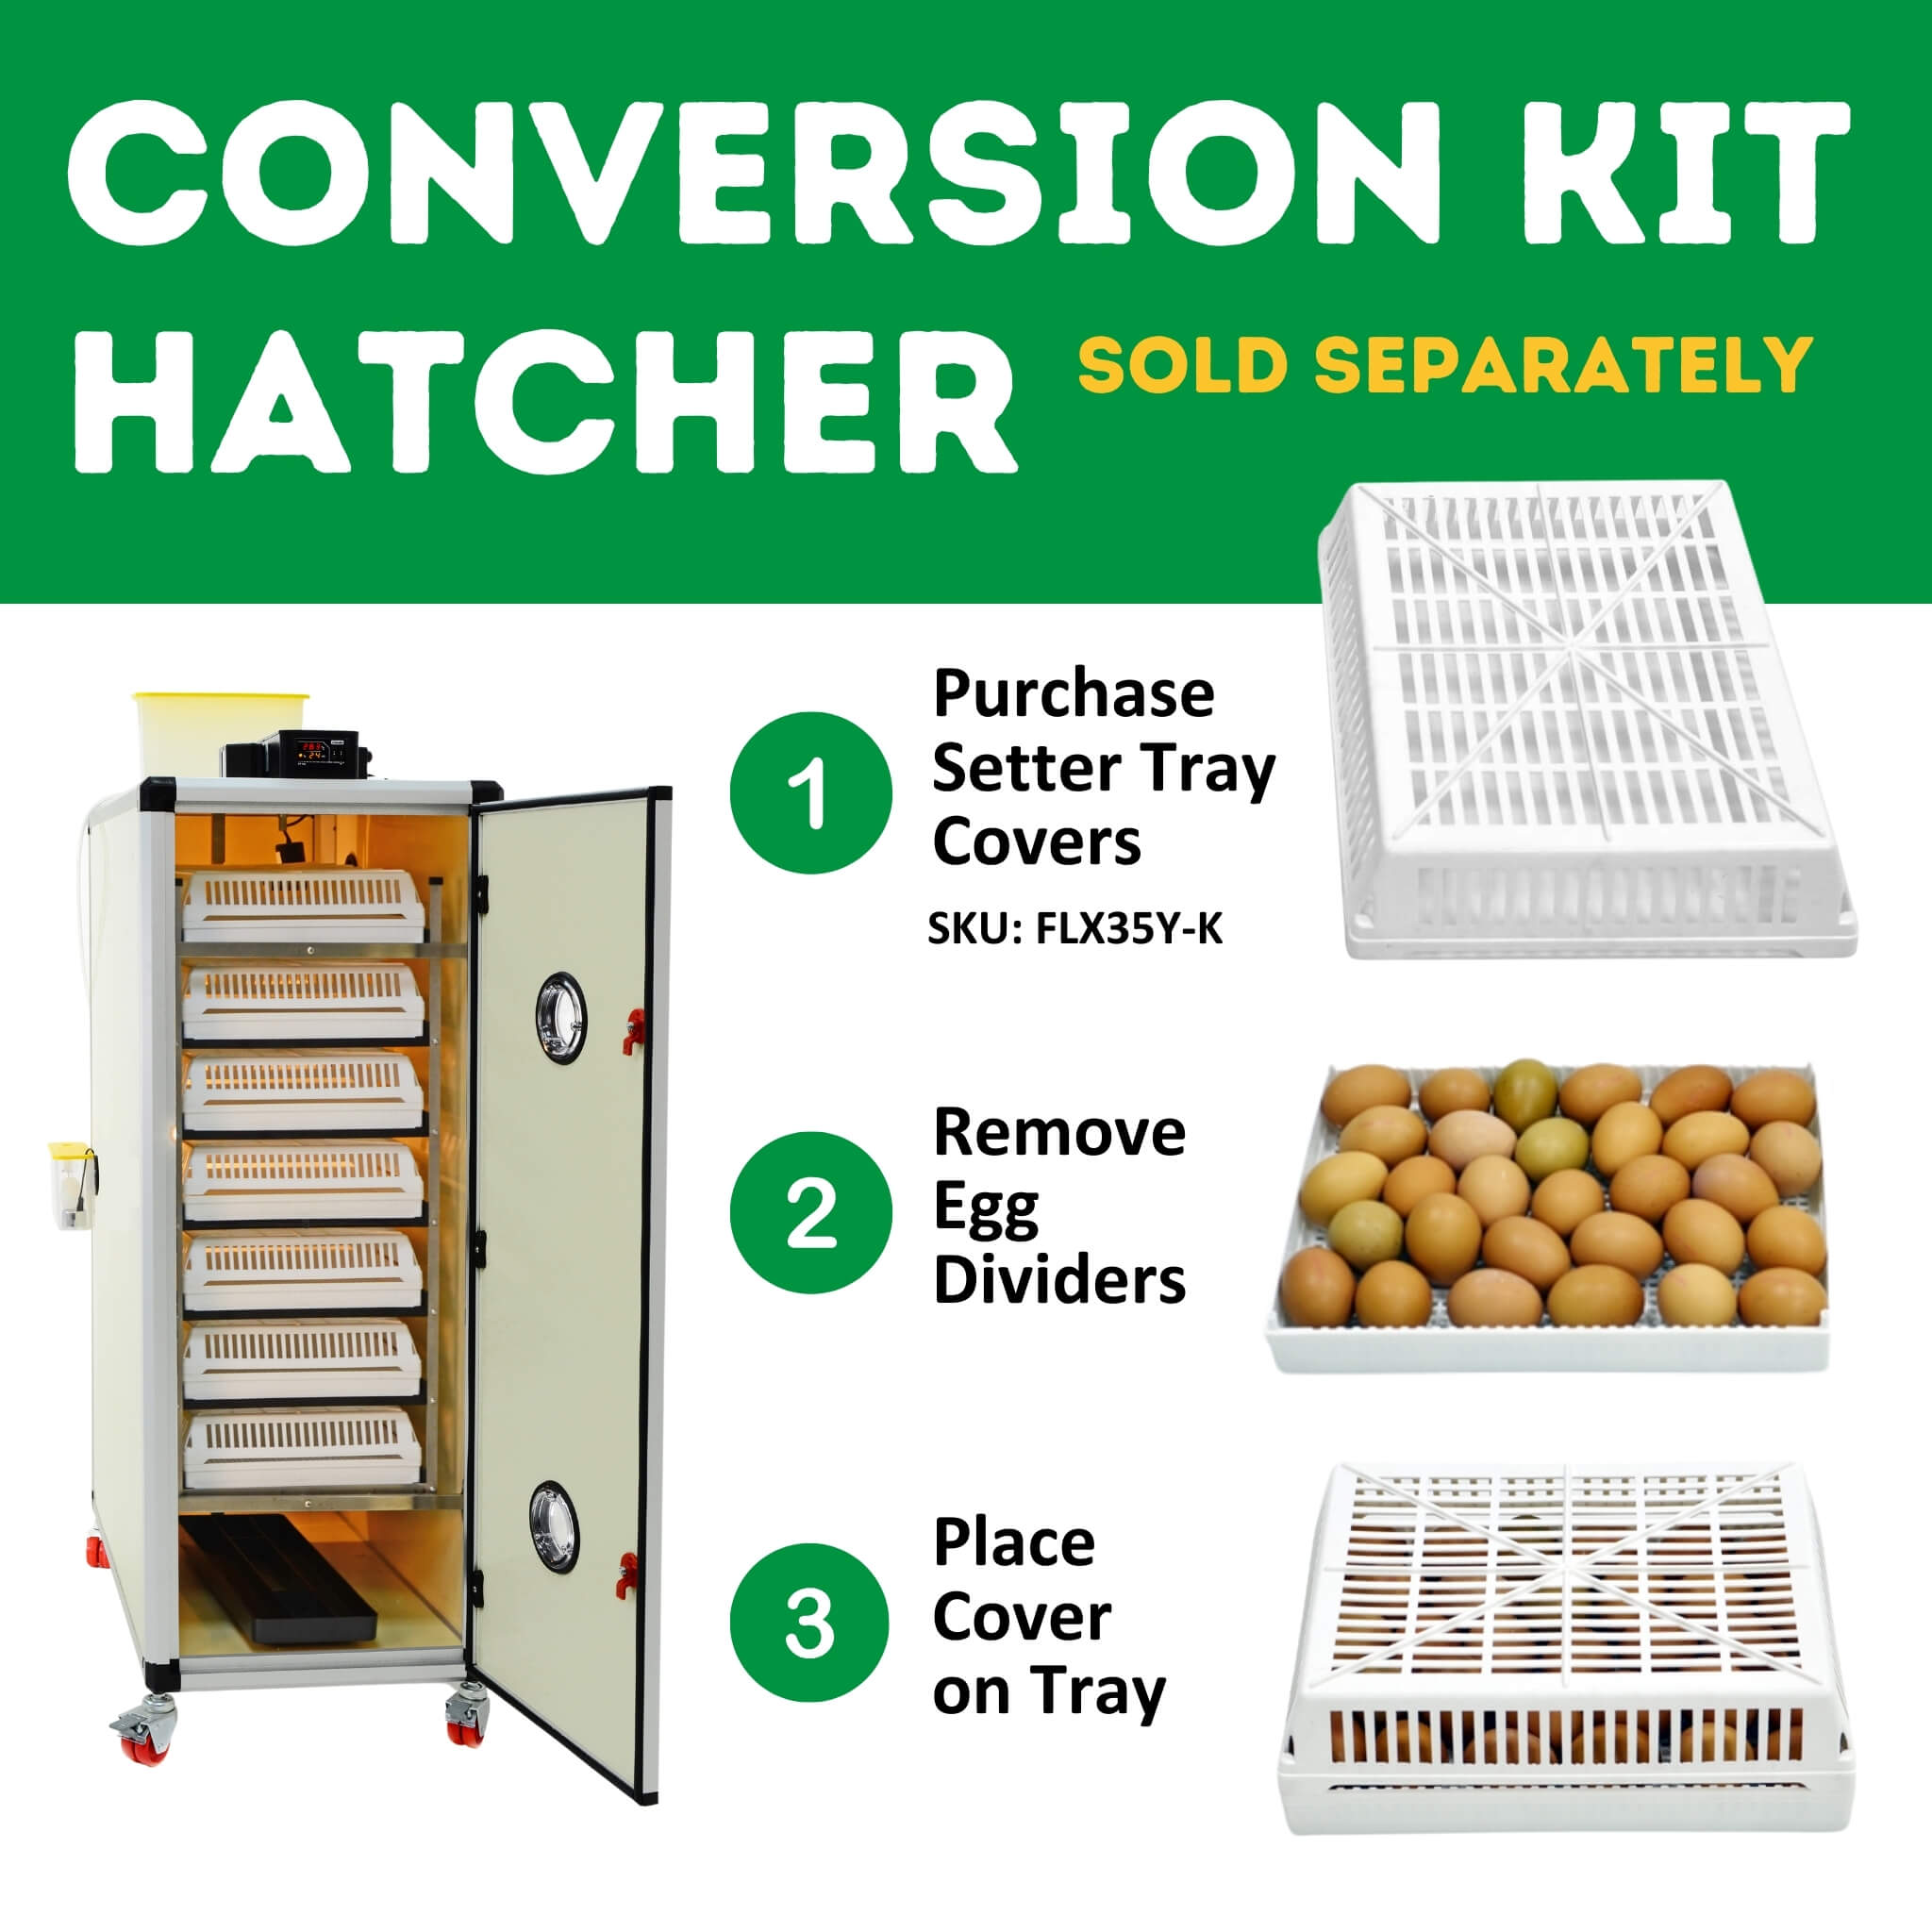 Hatching Time Cimuka. Step-by-step guide to converting the Cimuka HB500S setter incubator into a hatcher, highlighting the need for additional tray covers, a useful tip for poultry hatcheries.